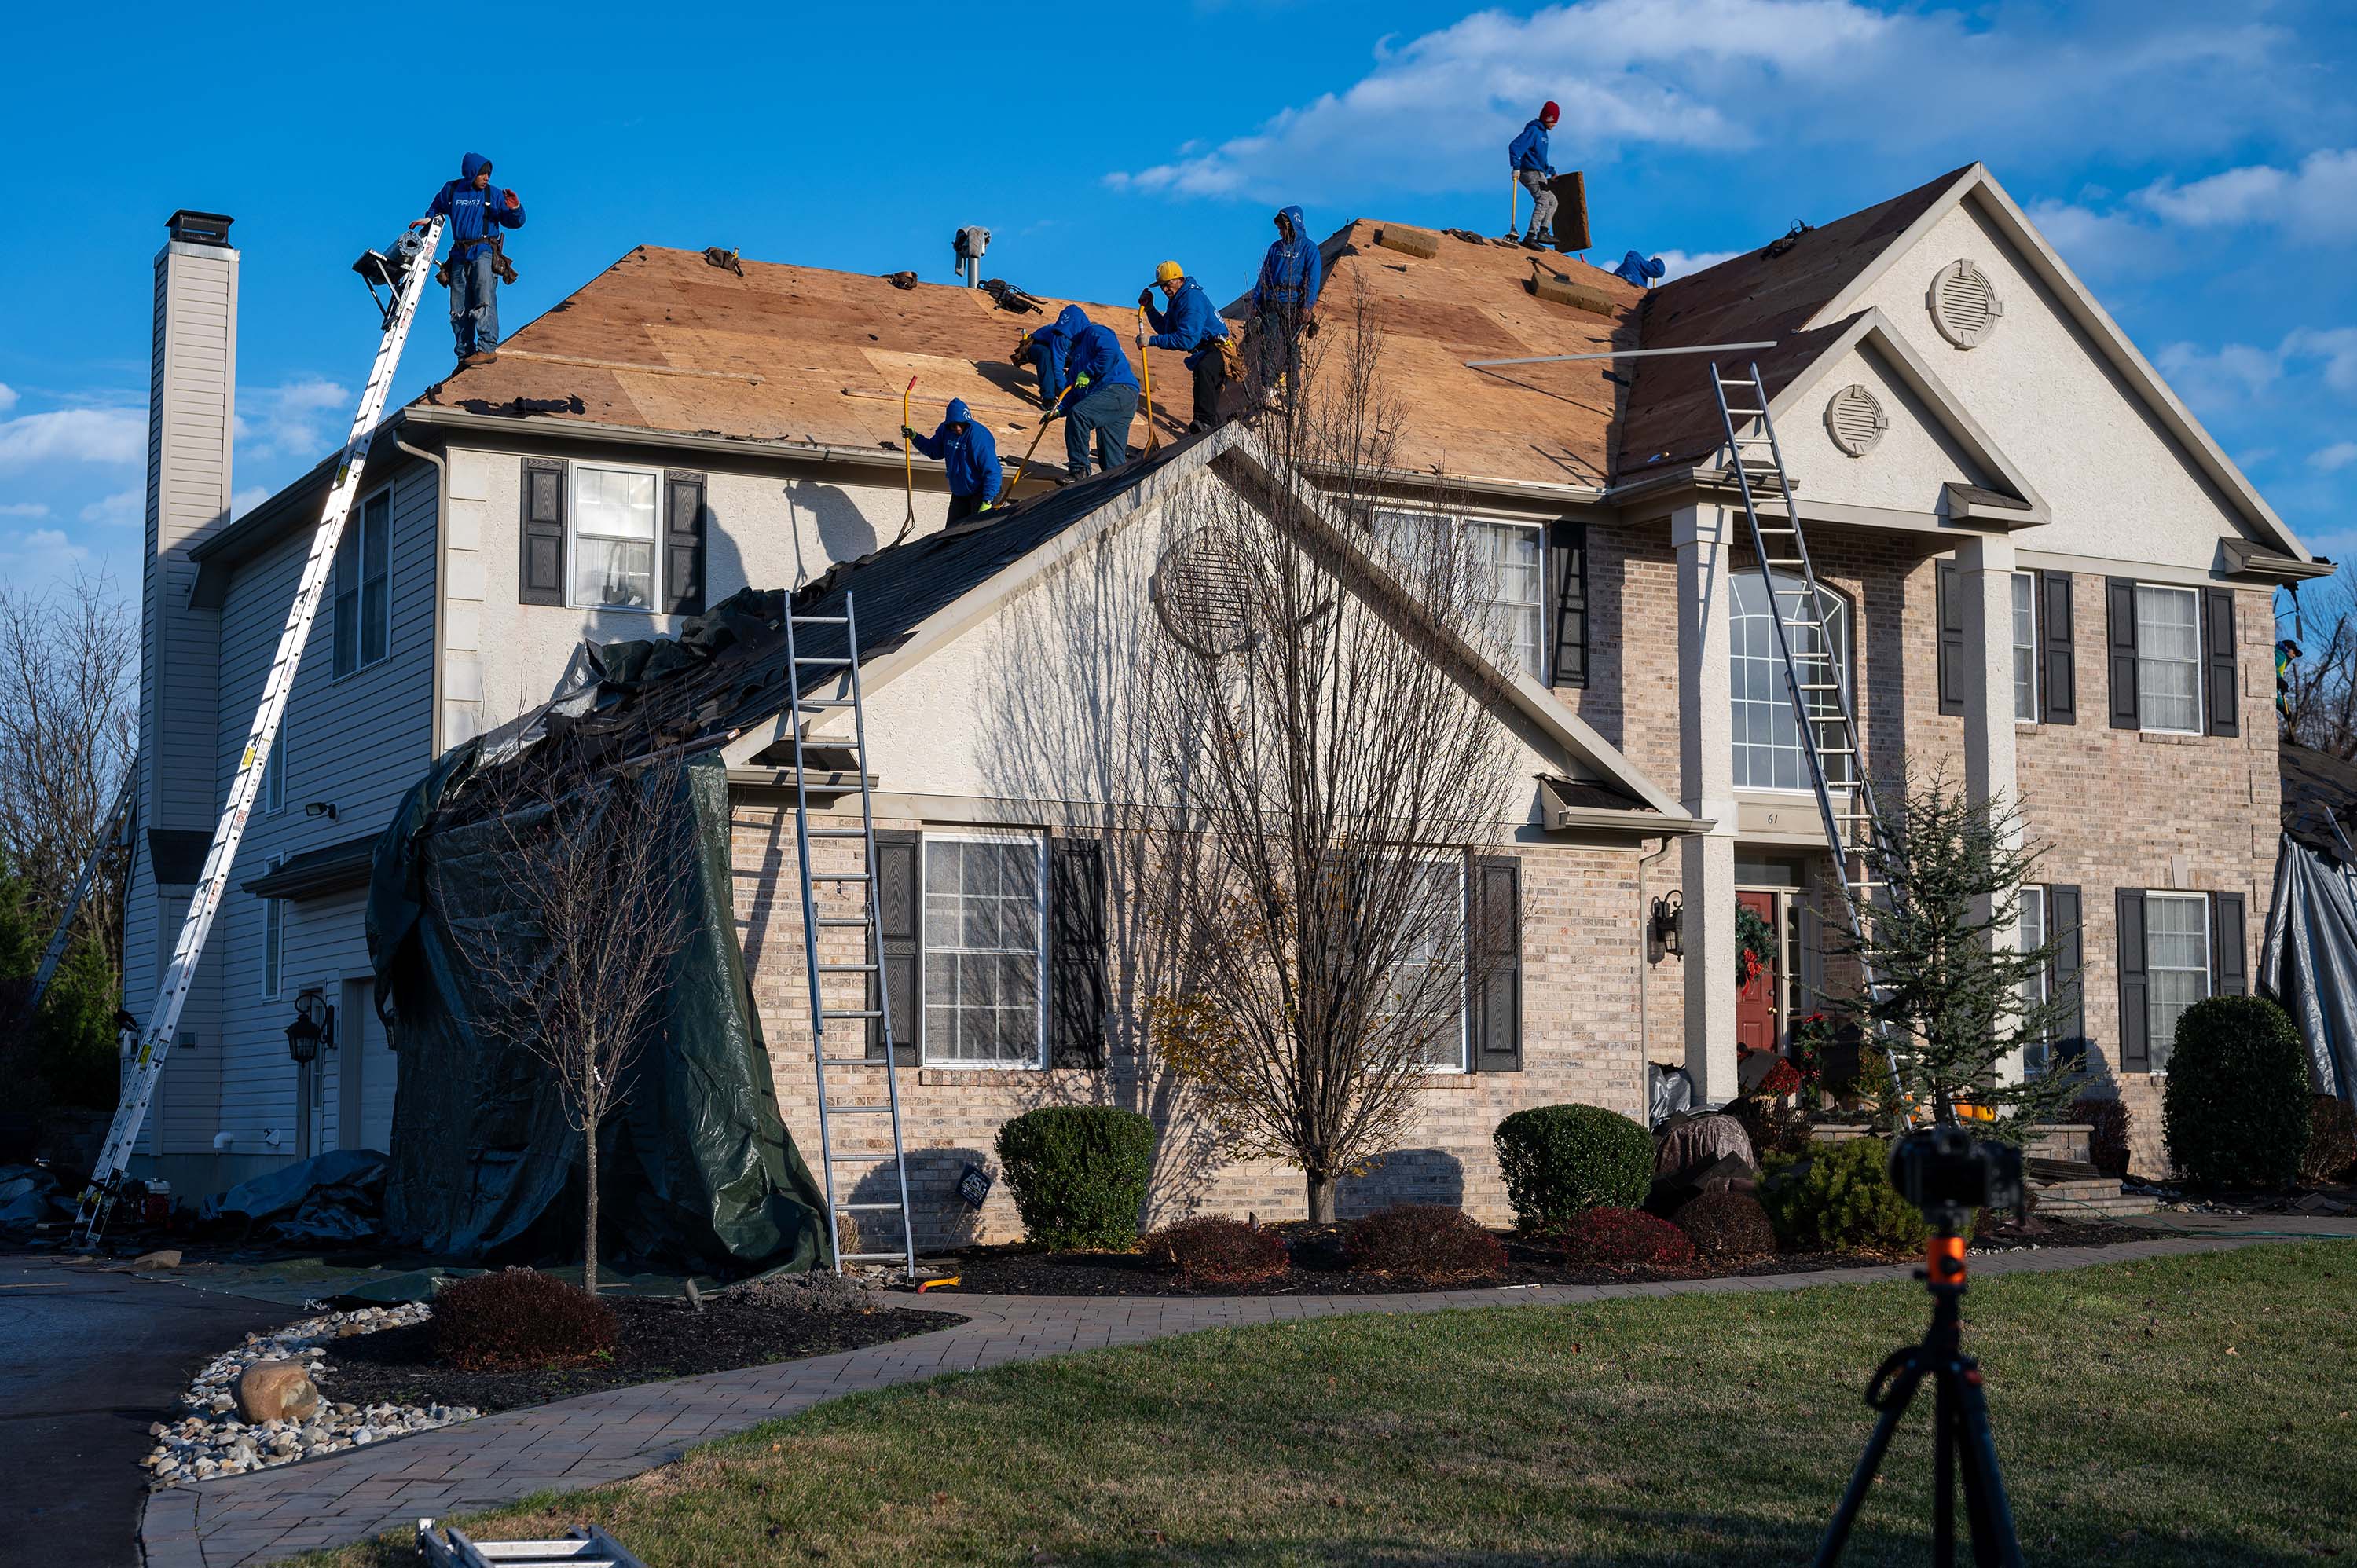 Roofing repair company - residential roofing contractors in Cherry Hill (large image)